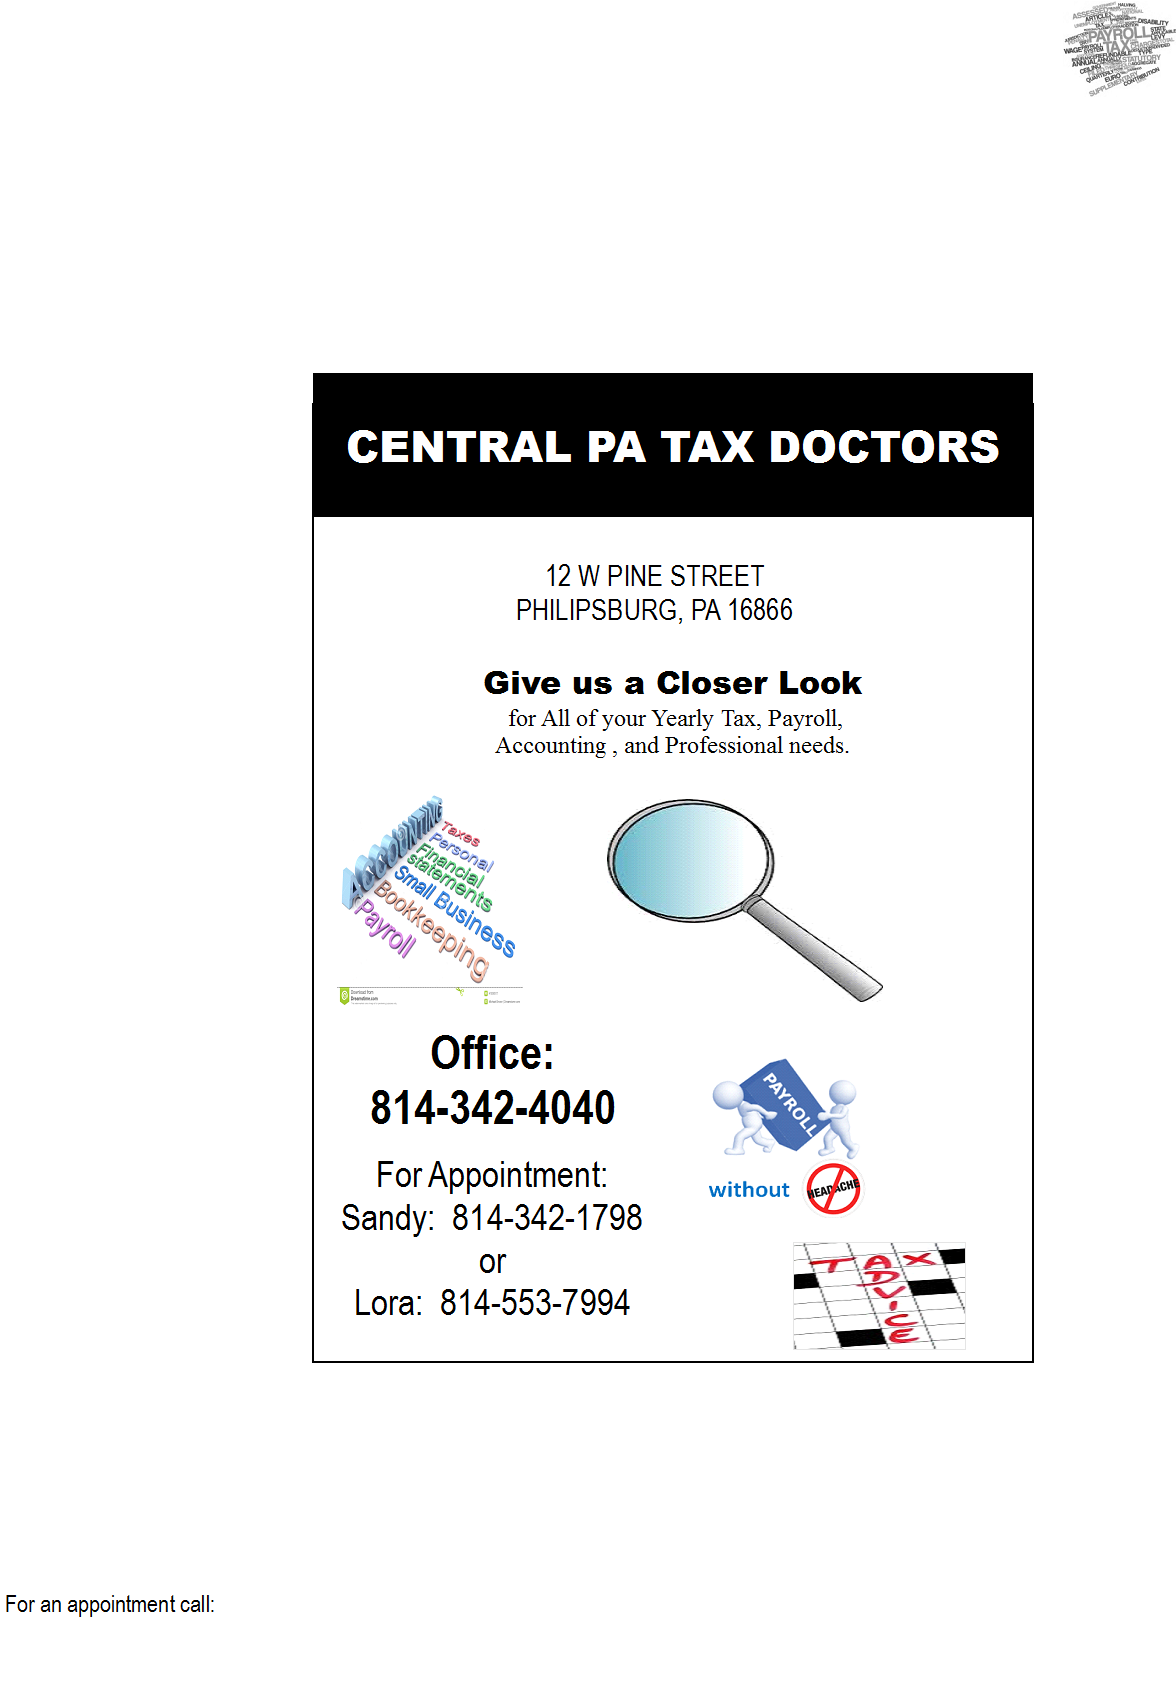 Central PA Tax Doctors